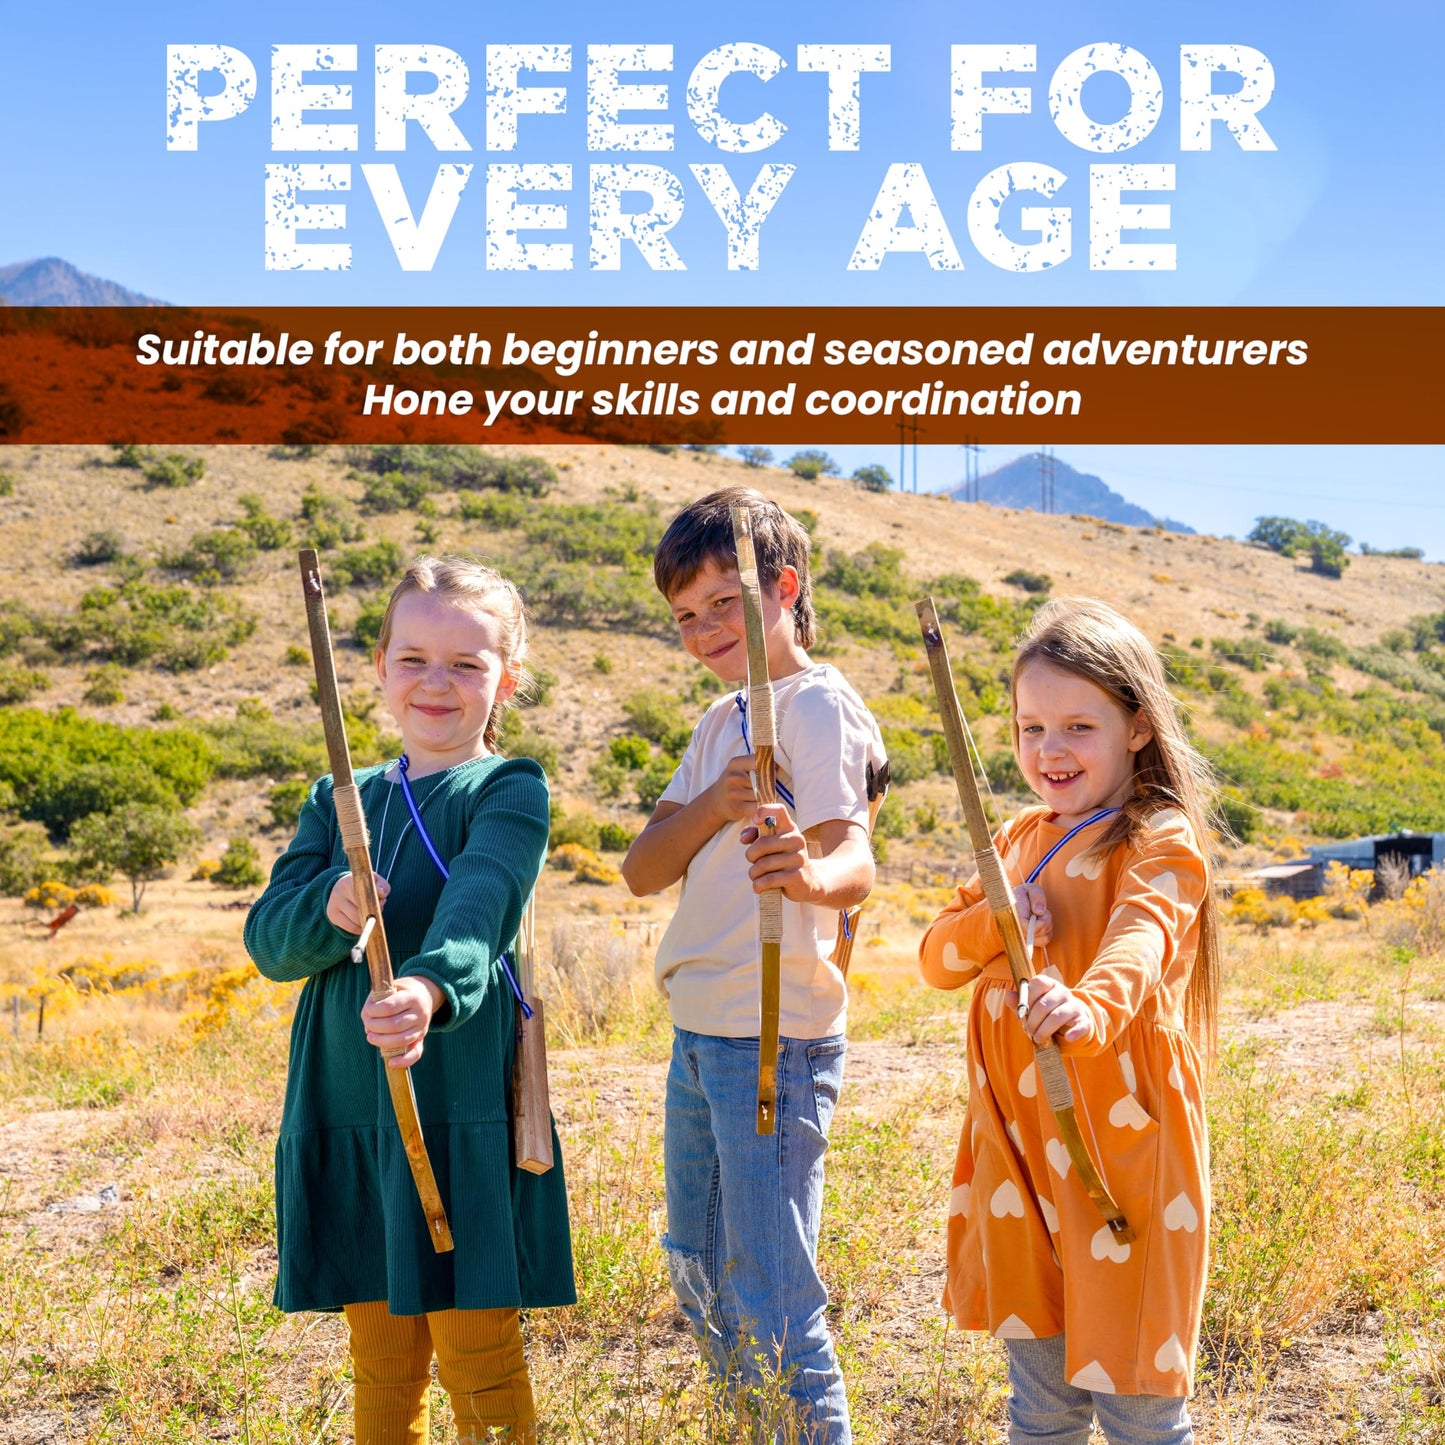 Adventure Awaits - 2-Pack Handmade Wooden Bow and Arrow Set - 20 Wood Arrows and 2 Quivers - for Outdoor Play